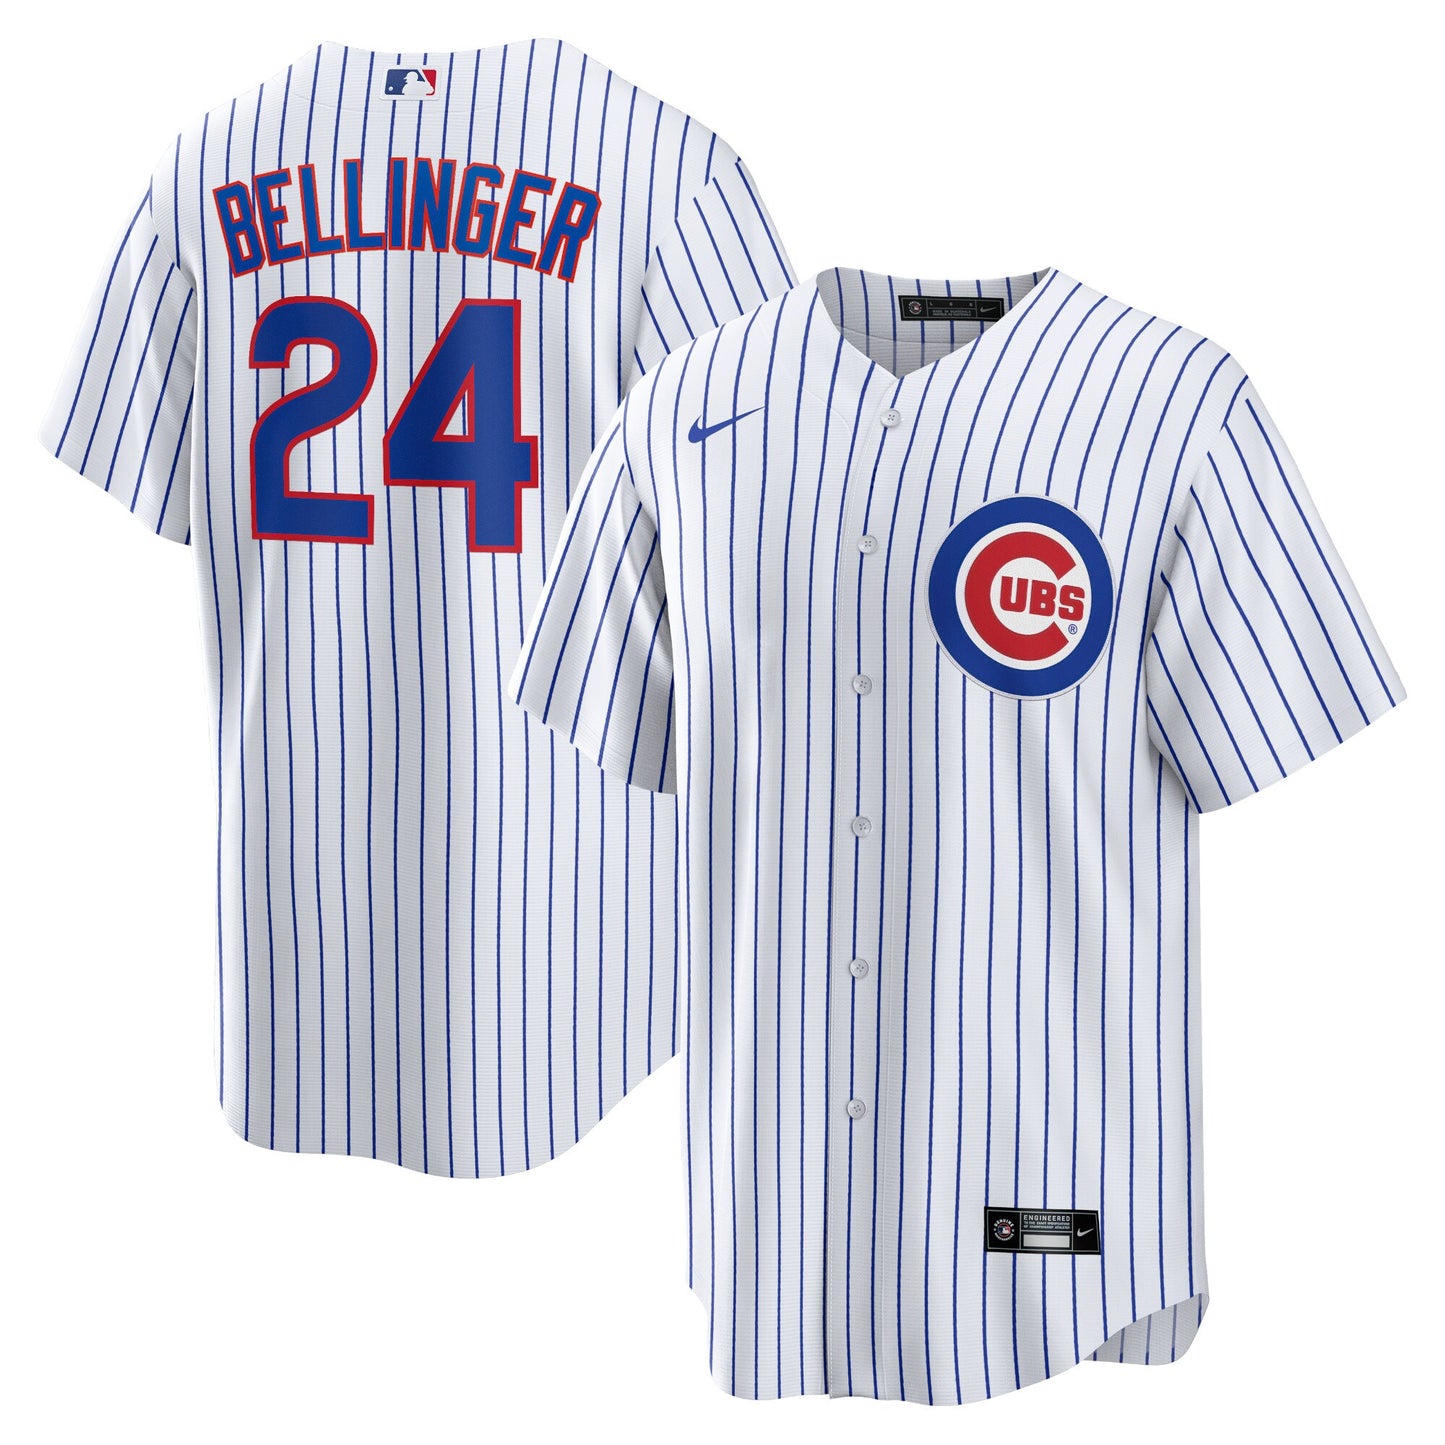 Cody Bellinger Chicago Cubs Nike Home Official Replica Player Jersey - White/Royal